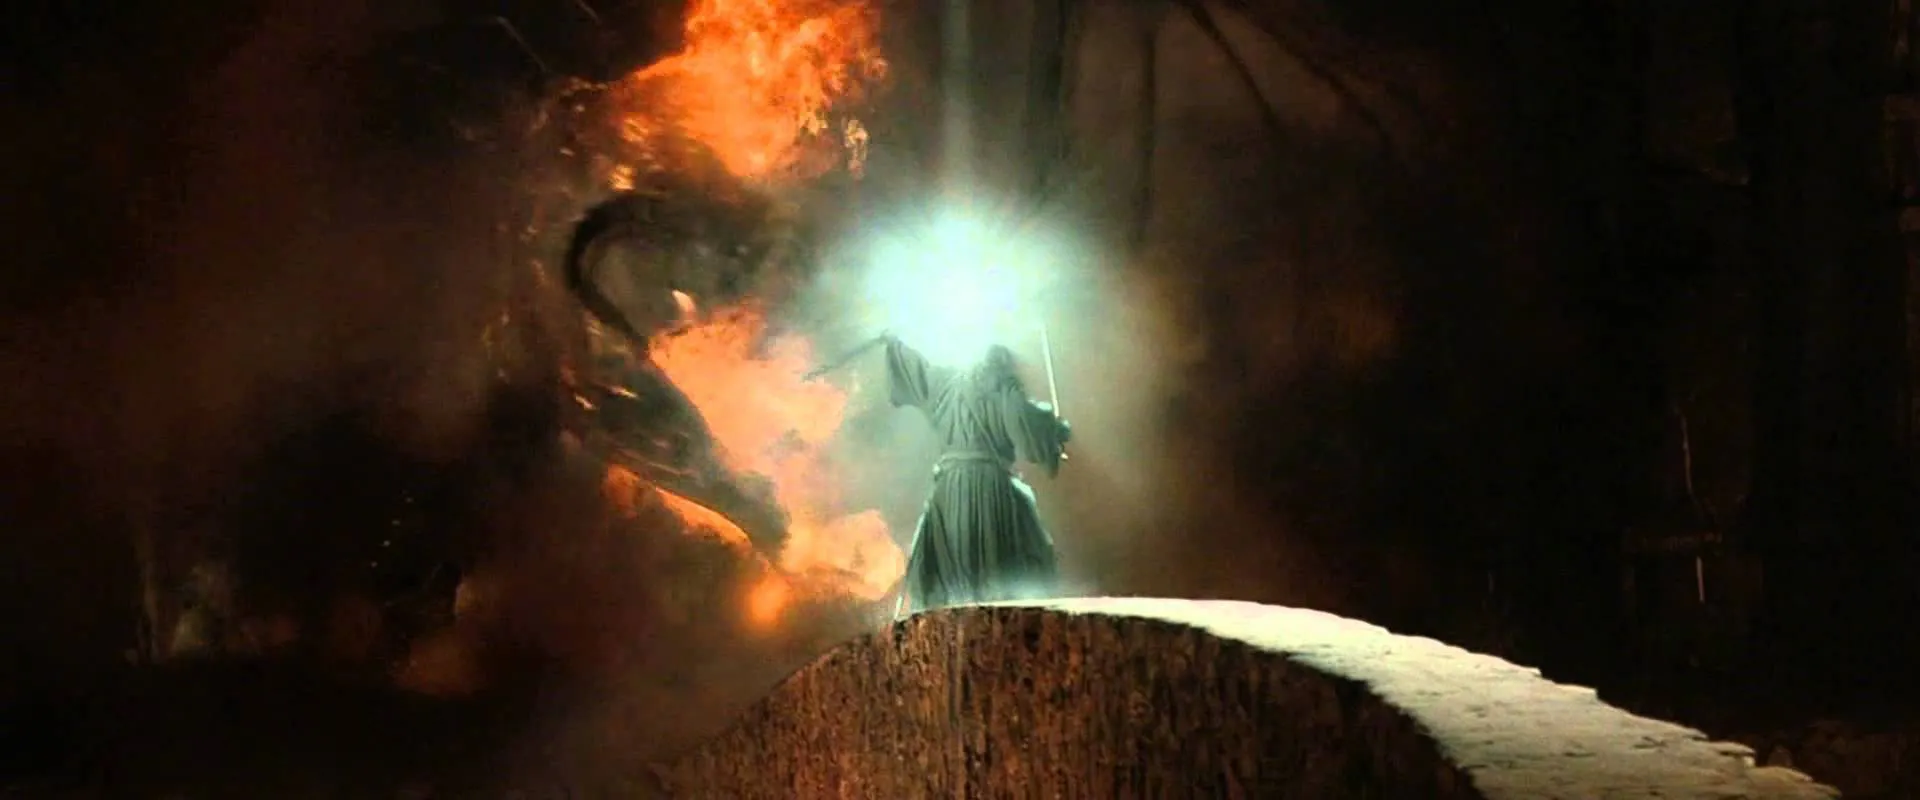 'The Lord of the Rings' to have new film | FMV6